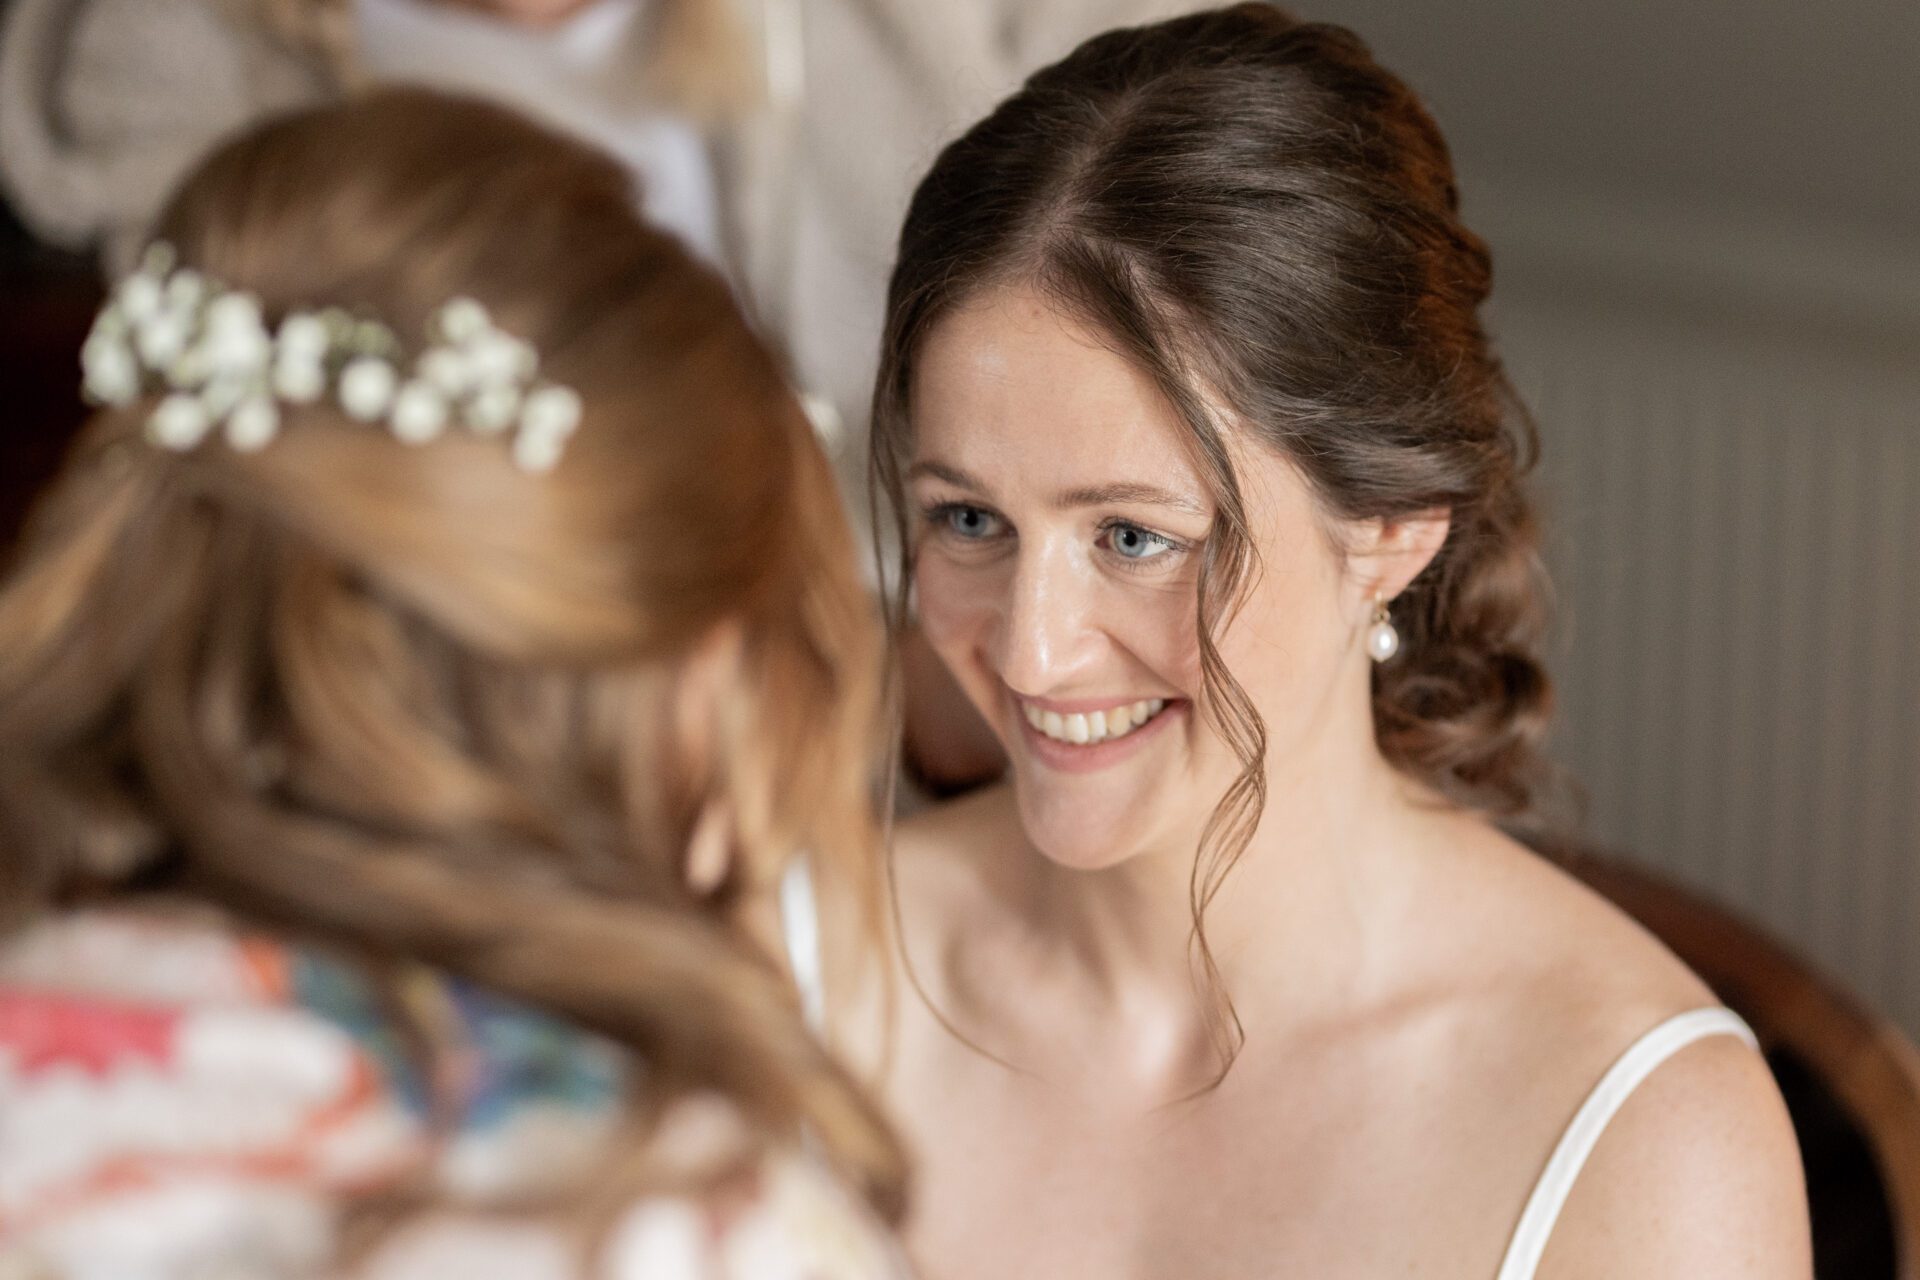 The bride shares a moment with a bridesmaid before her Somerset wedding